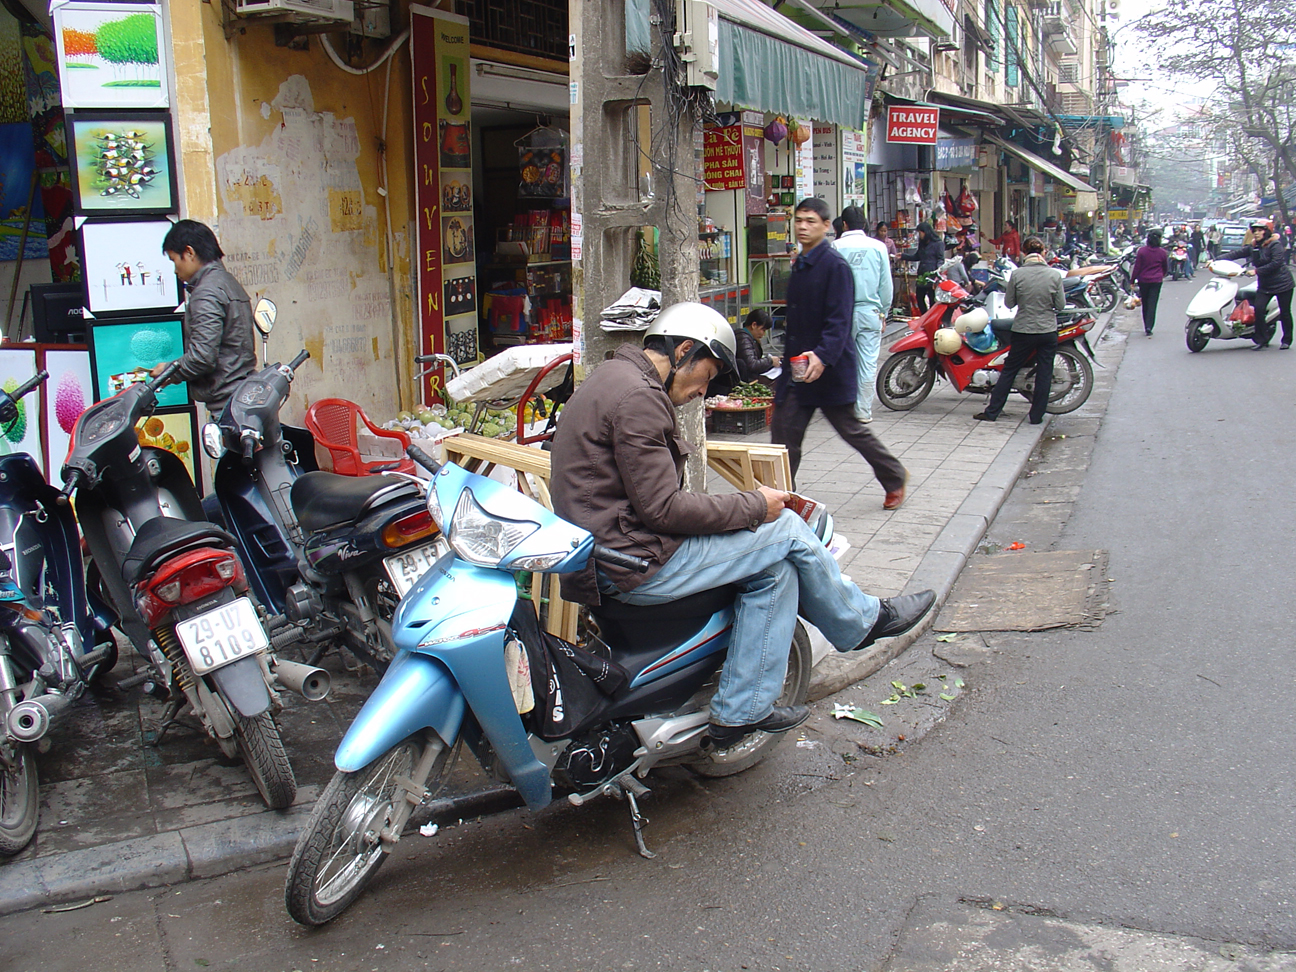 A man sitting on his motorbike waiting for customers